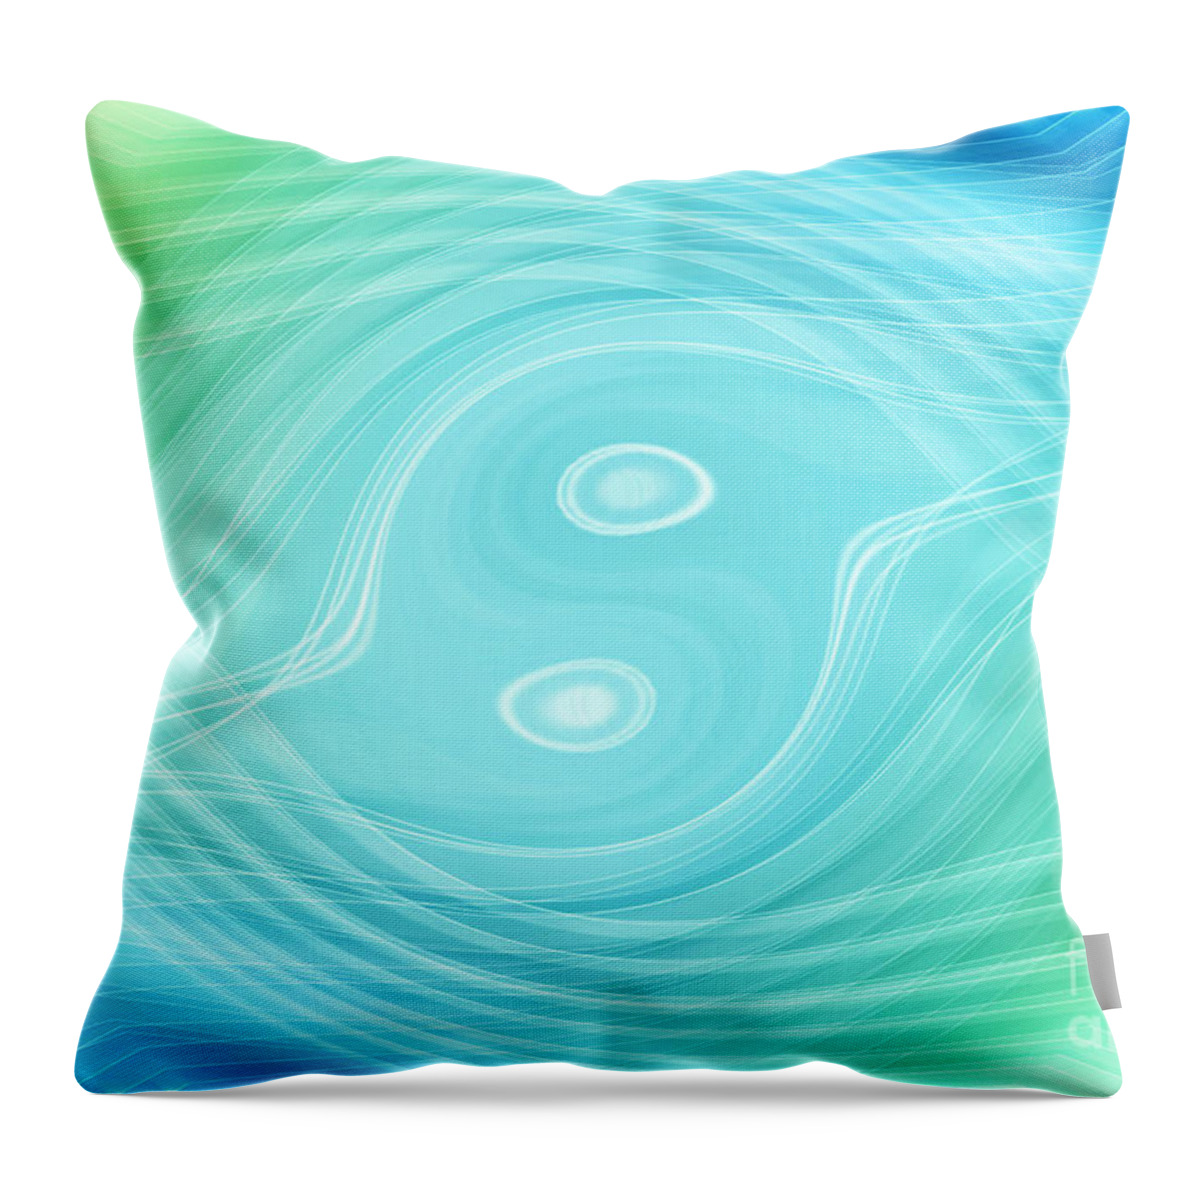 Abstract Throw Pillow featuring the digital art Island by Hannes Cmarits